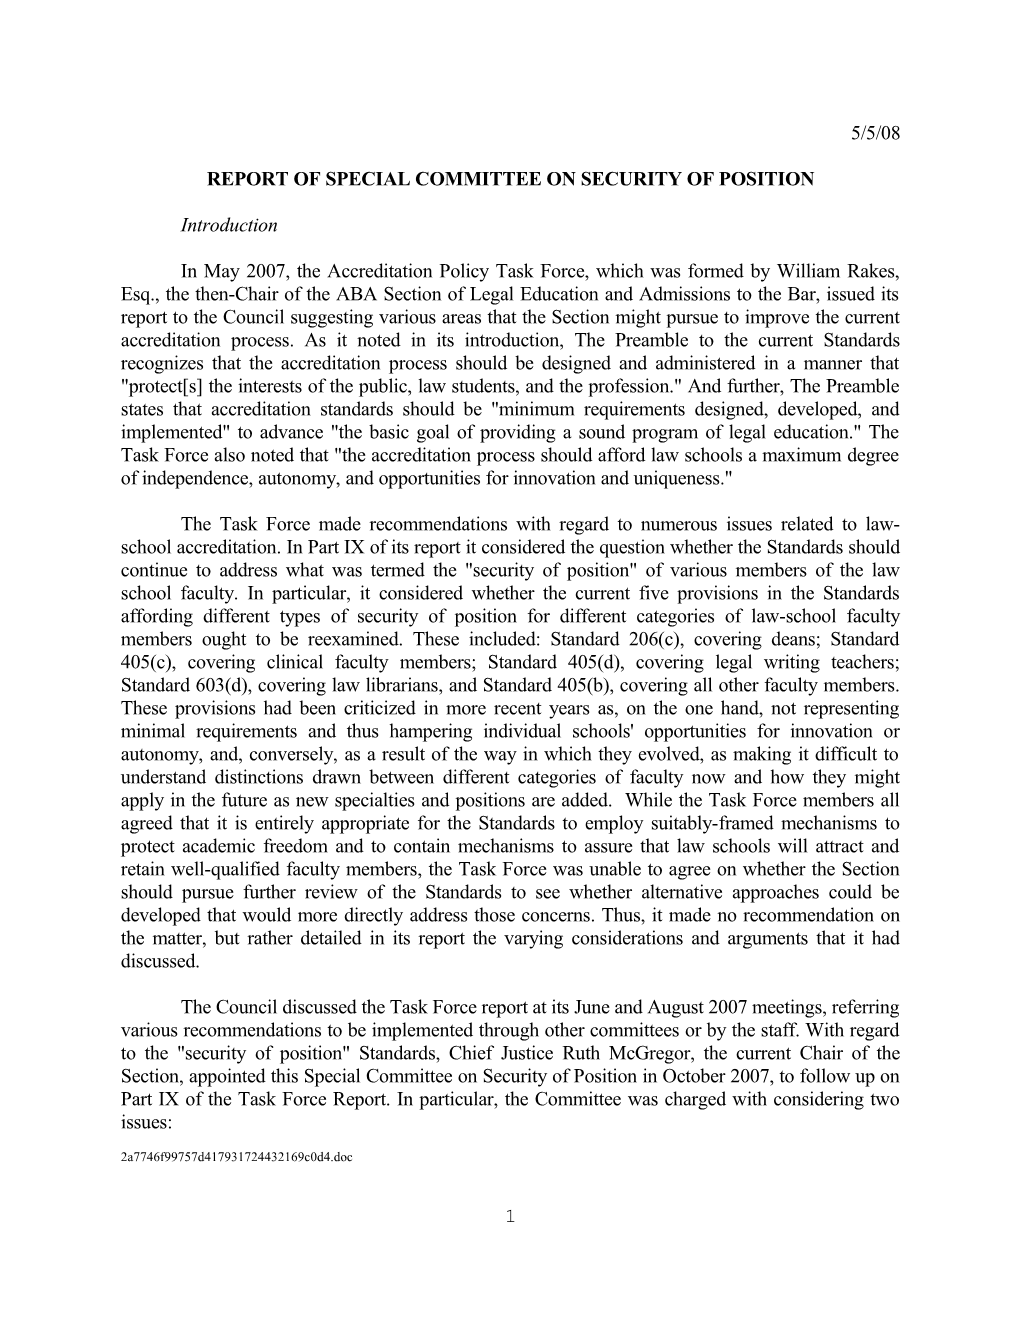 Report of Special Committee on Security of Position